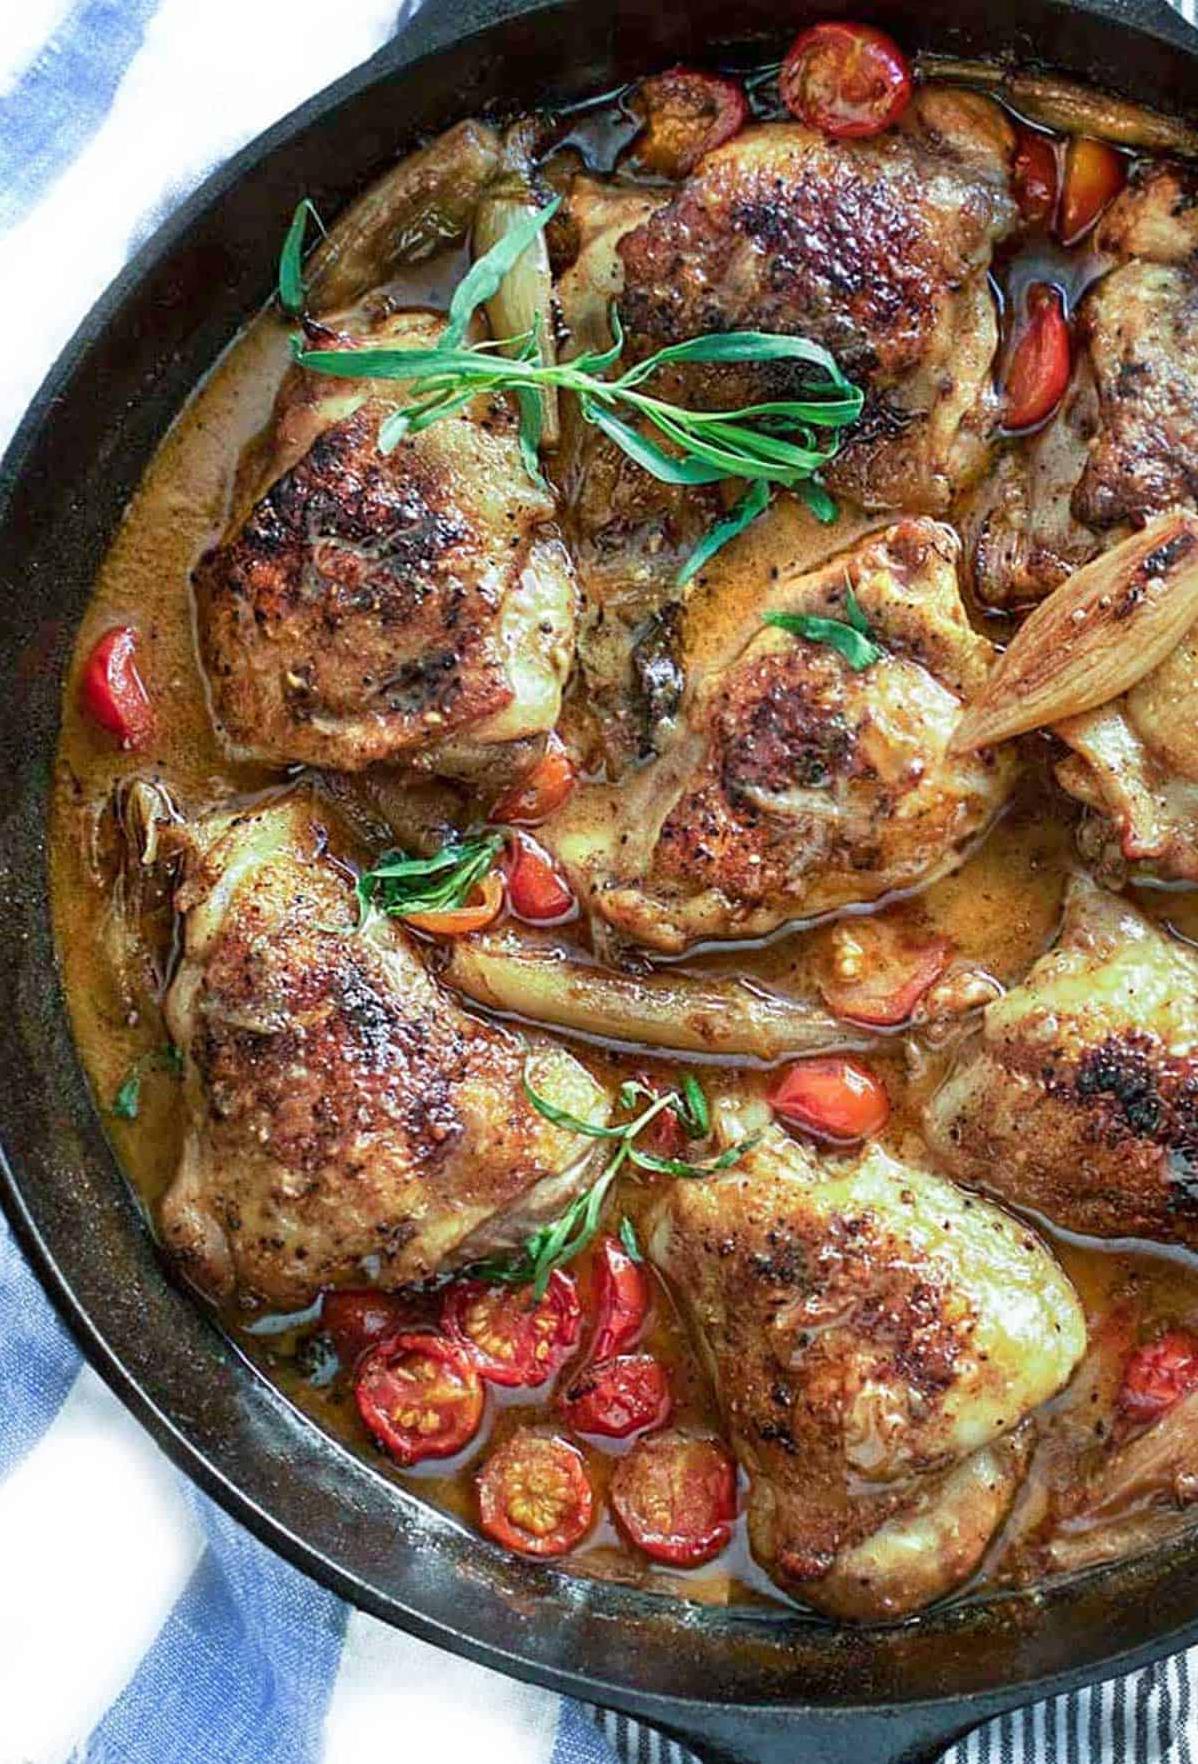  A sizzling and savory dish filled with tender chicken and caramelized shallots.